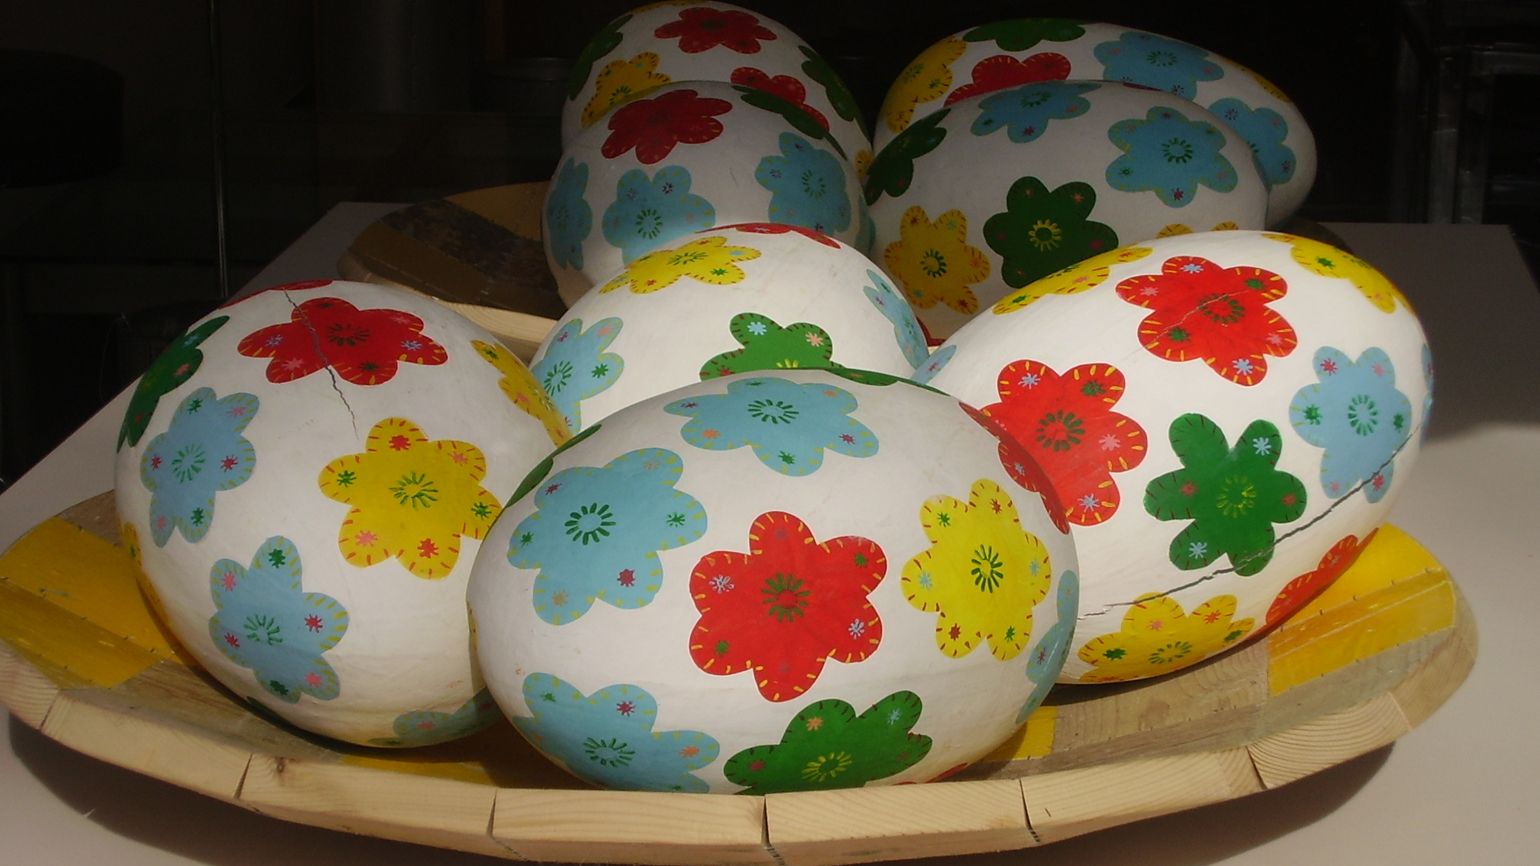 Large Easter eggs with a colorful floral design pattern from France